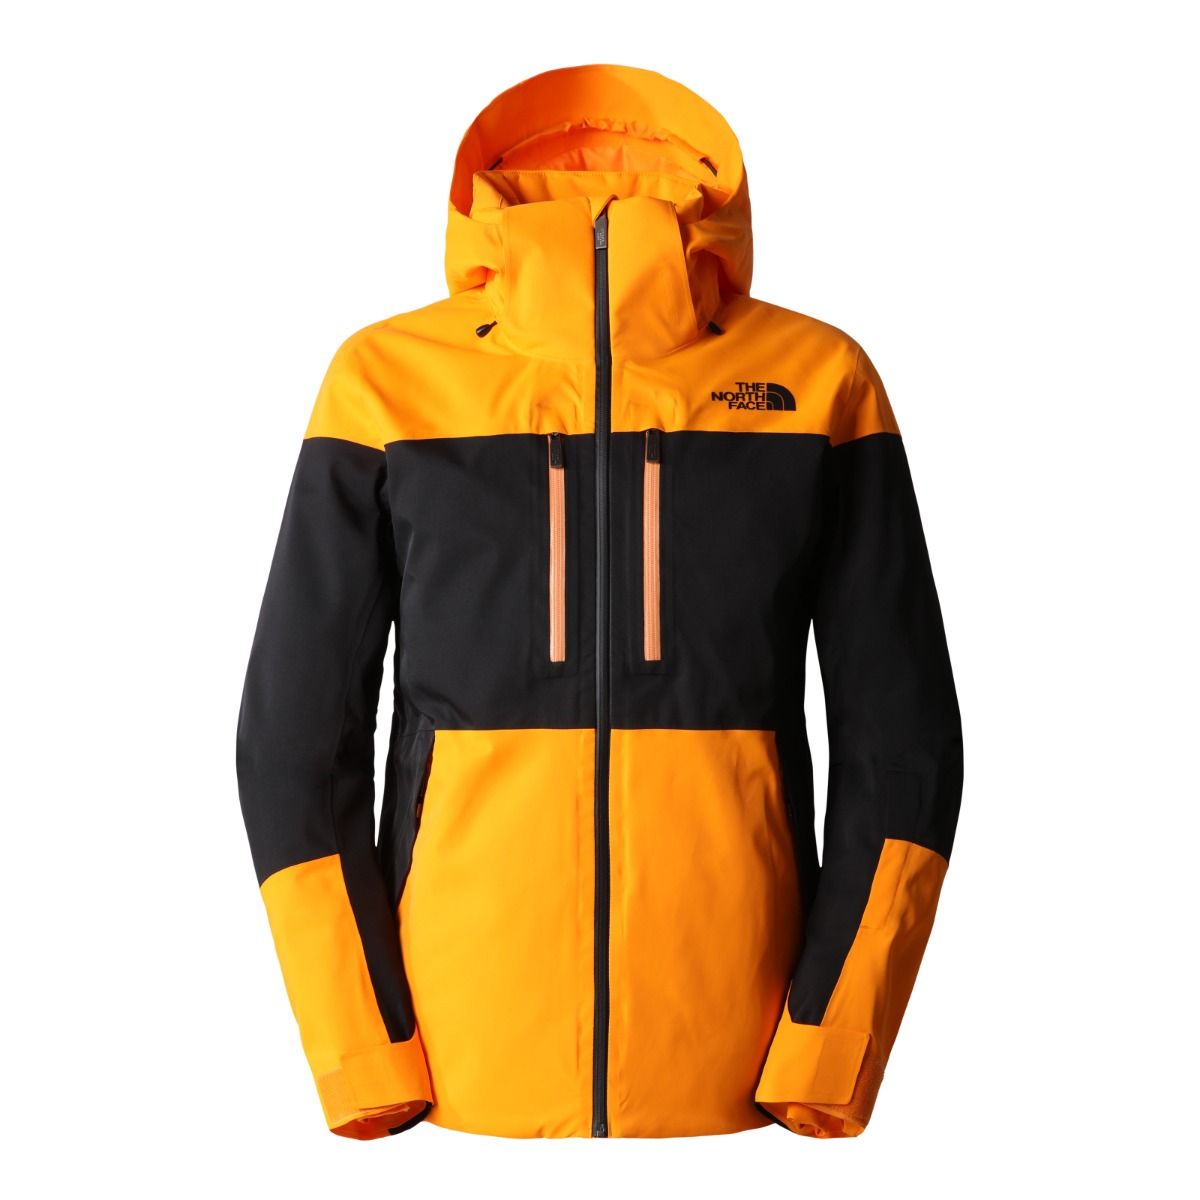 The North Face - M's CHAKAL JACKET